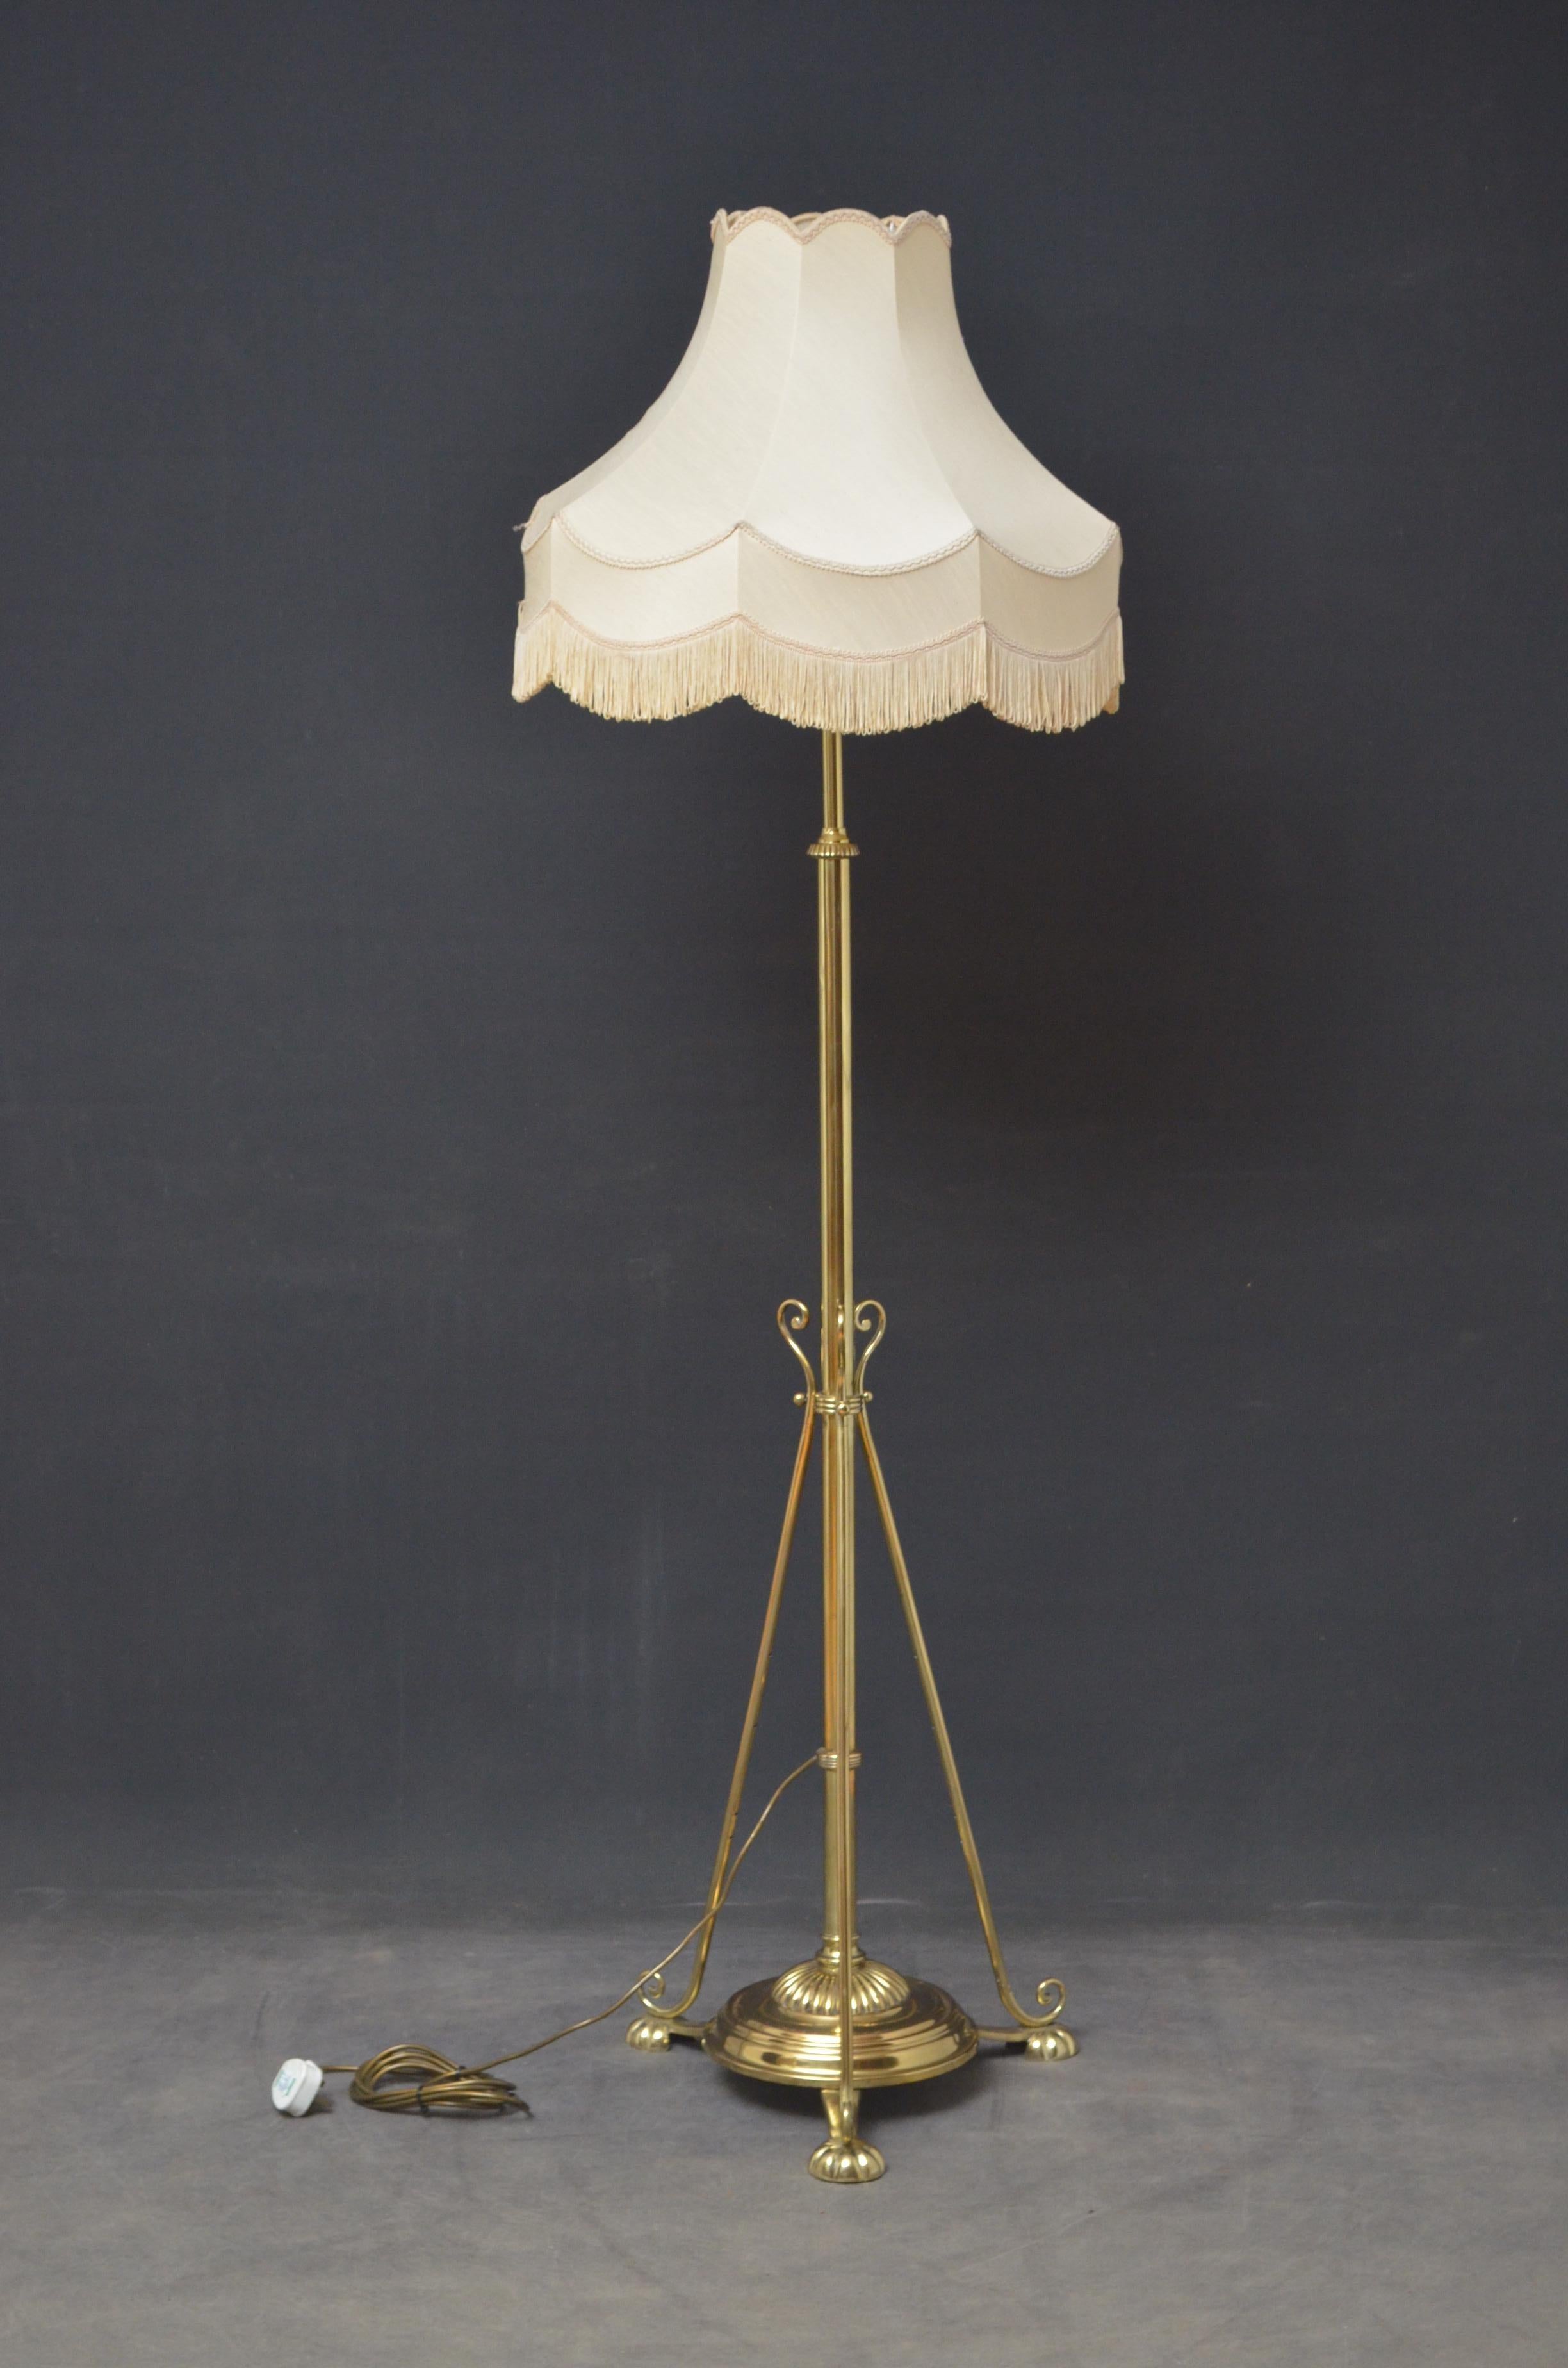 k0024, elegant Arts & Crafts brass standard lamp with height adjustable column and fluted circular base terminating in 3 fluted pad feet. This antique lamp has been rewired and PAT tested. It is ready to use at home. Lampshade is not included but it